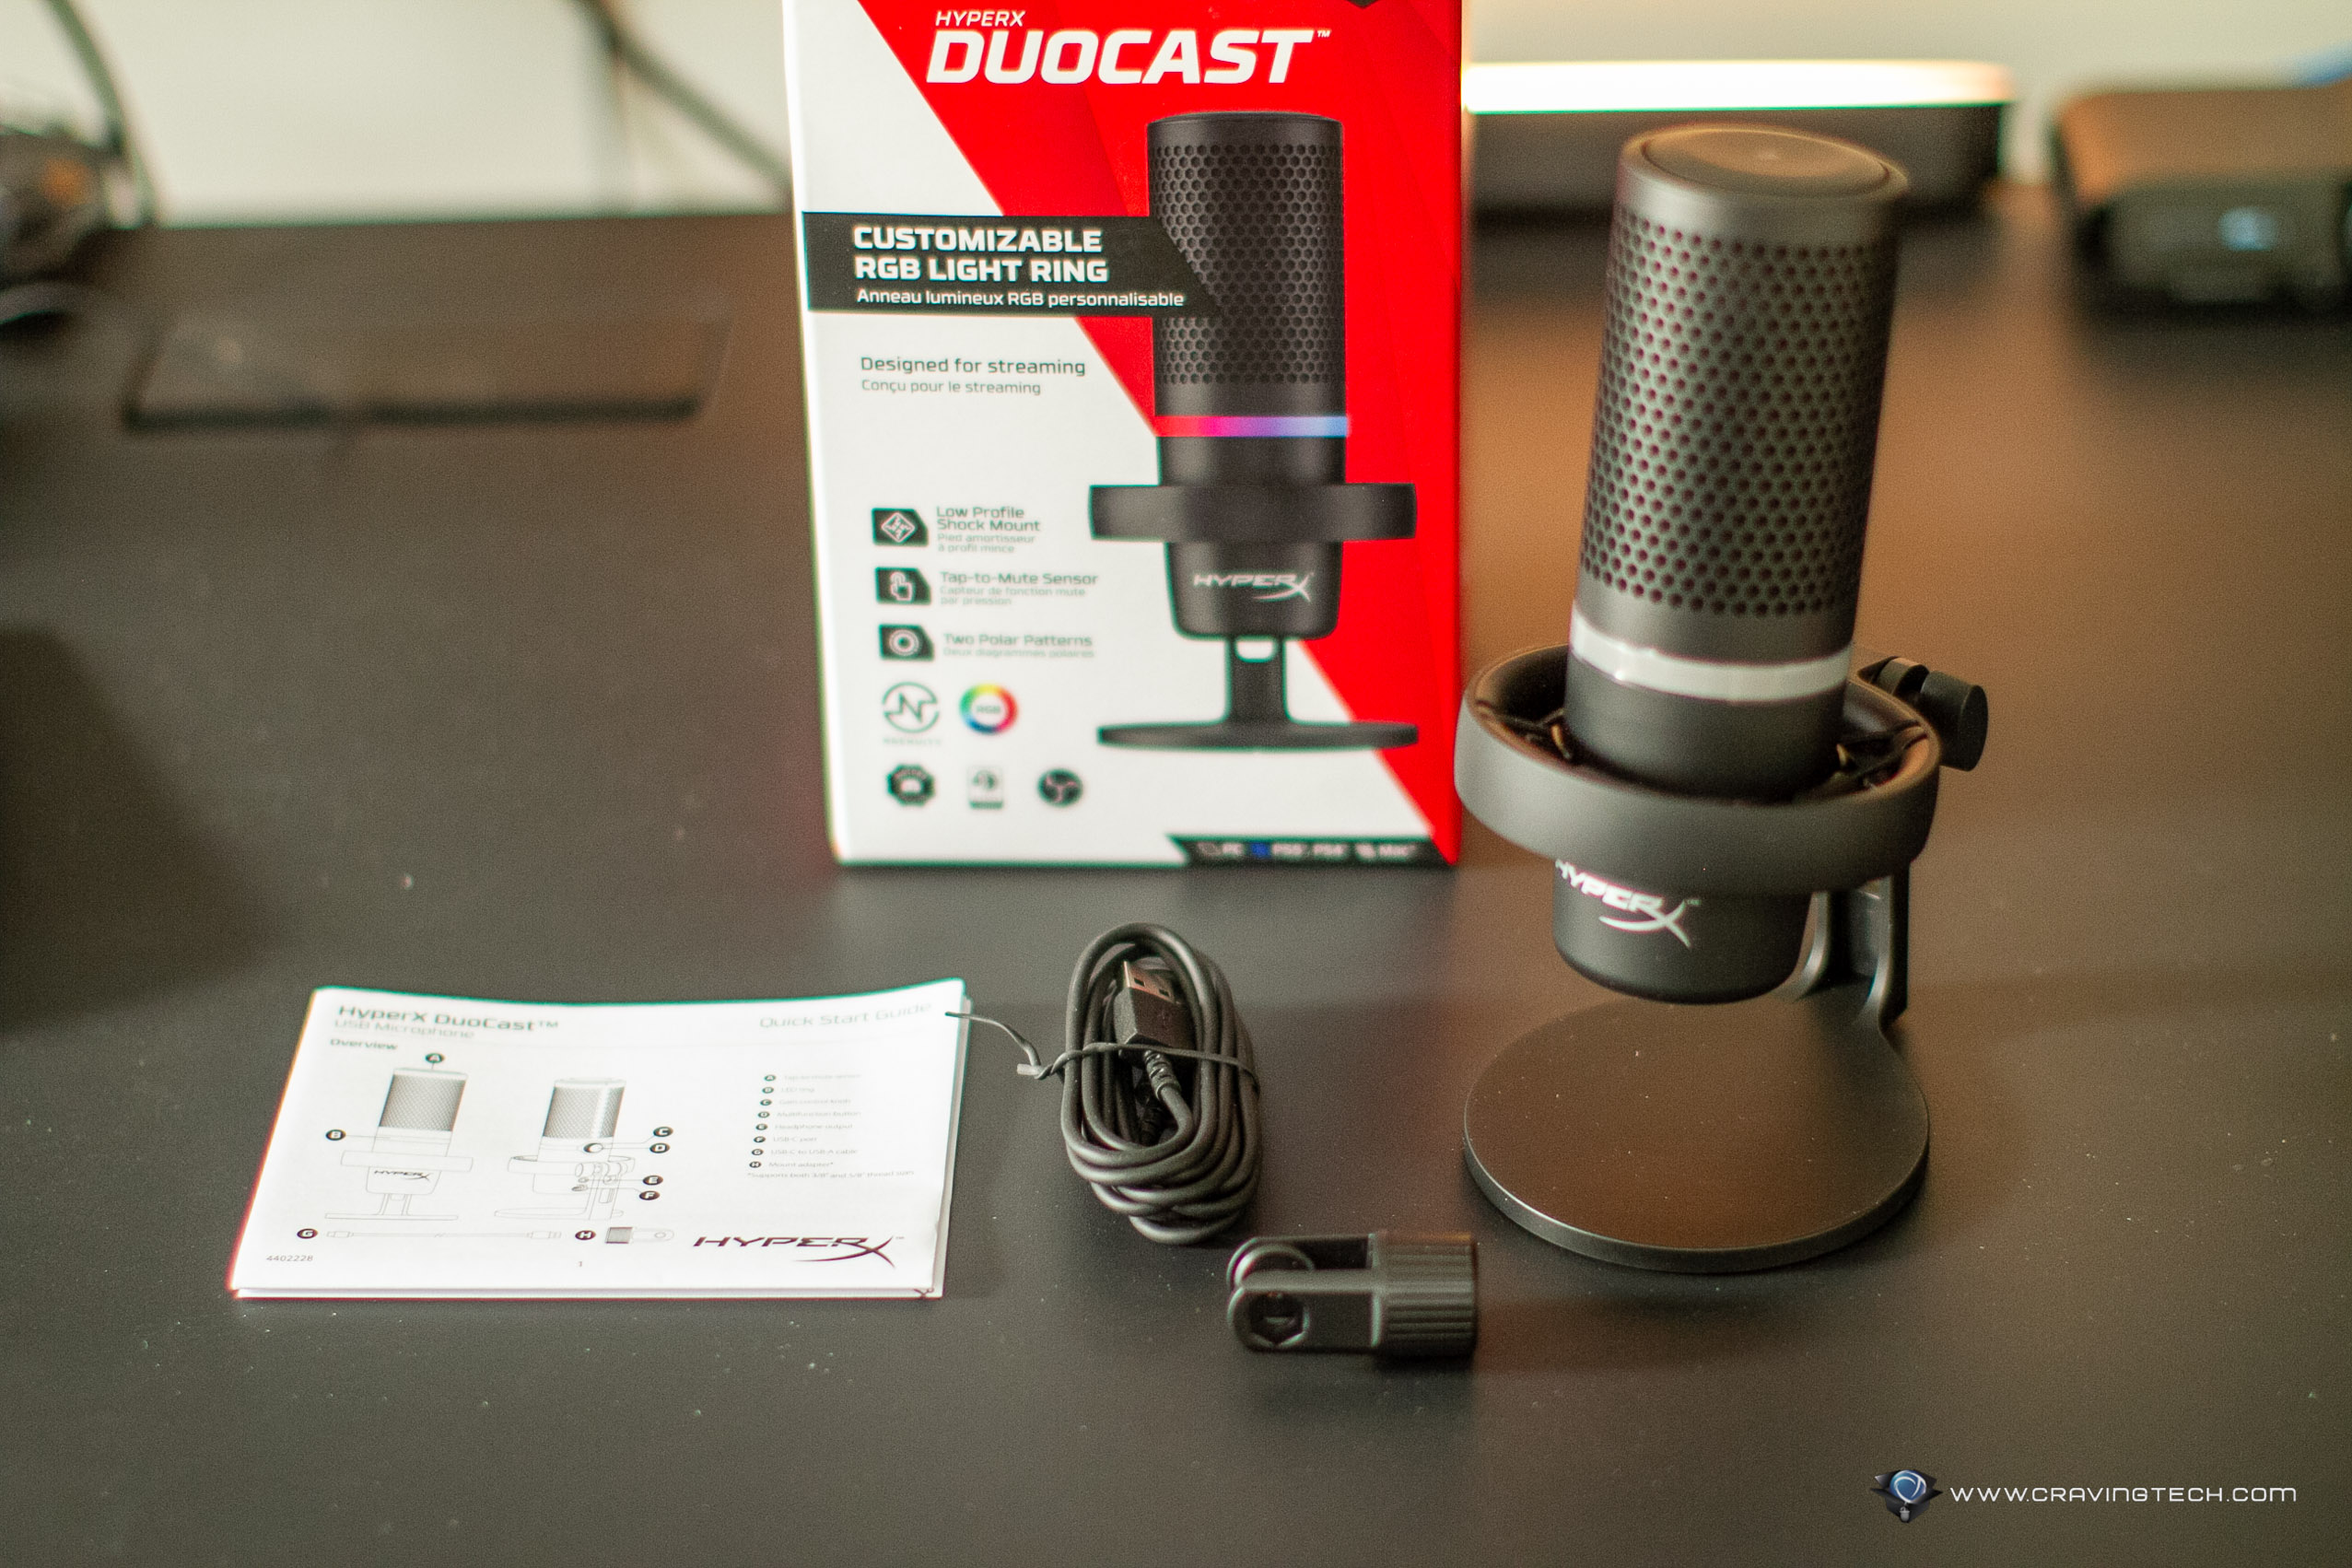 Review: HyperX QuadCast S - a solid mid-level mic